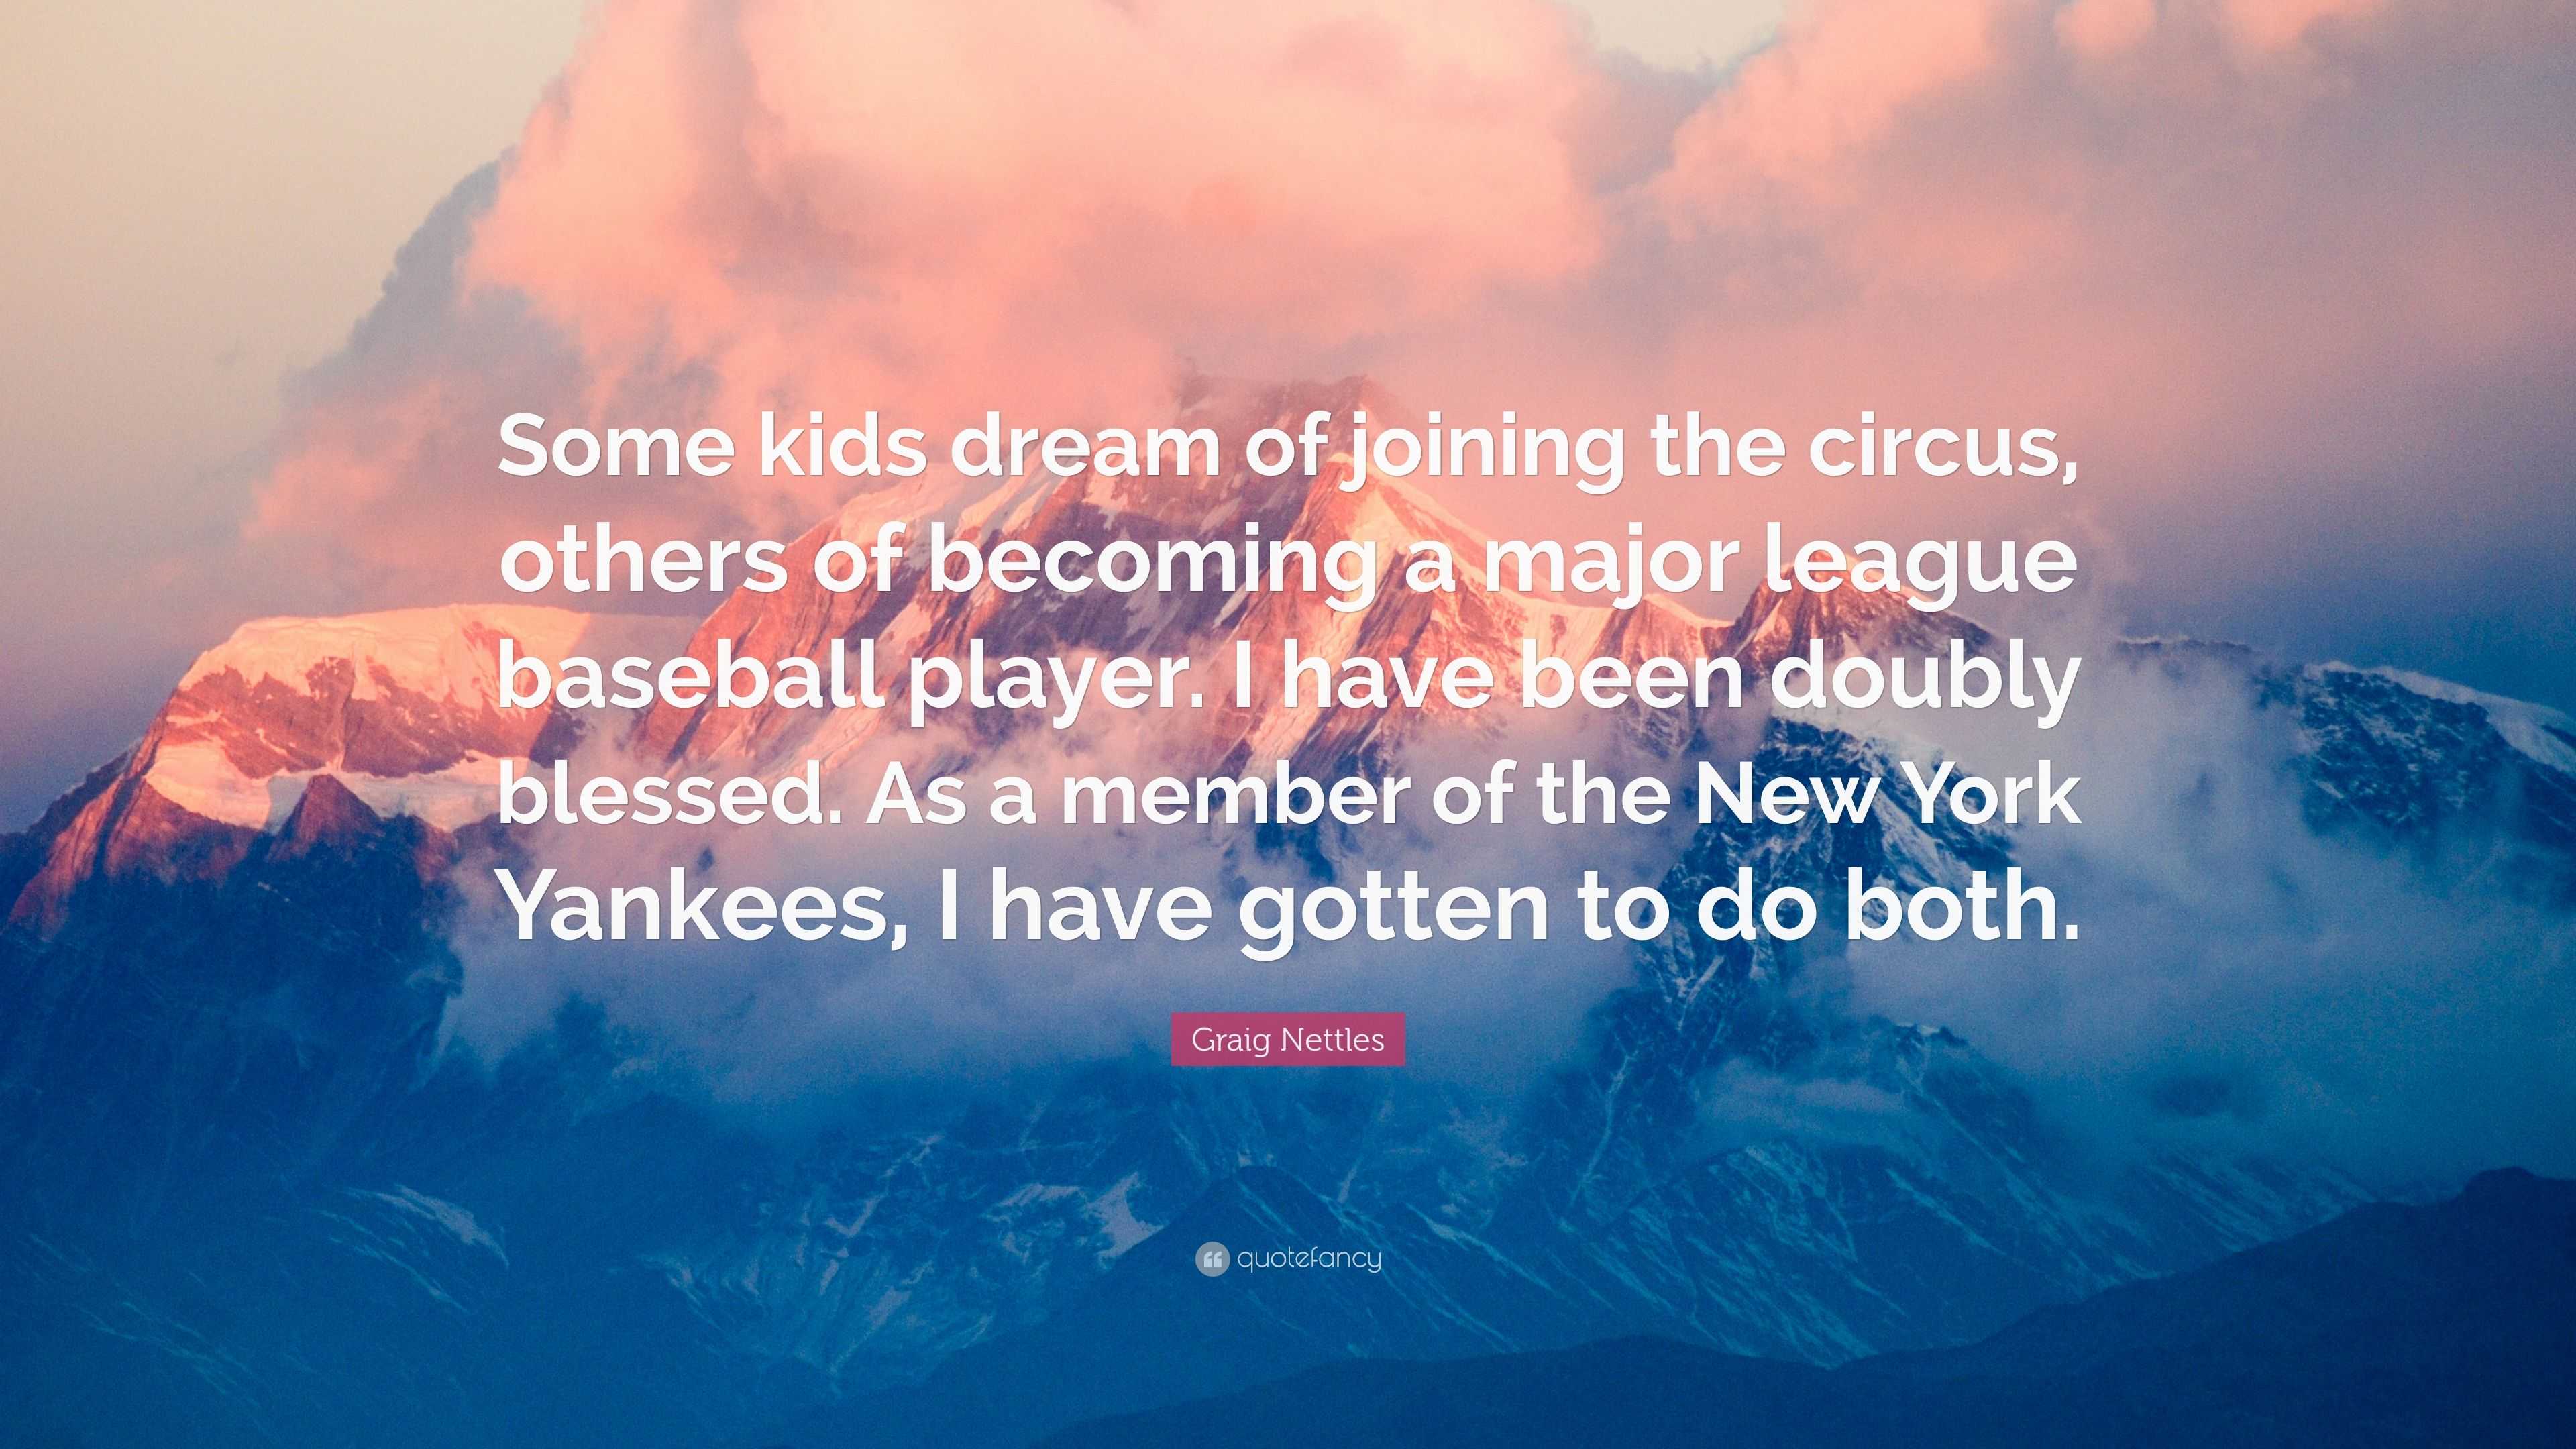 TOP 10 QUOTES BY GRAIG NETTLES